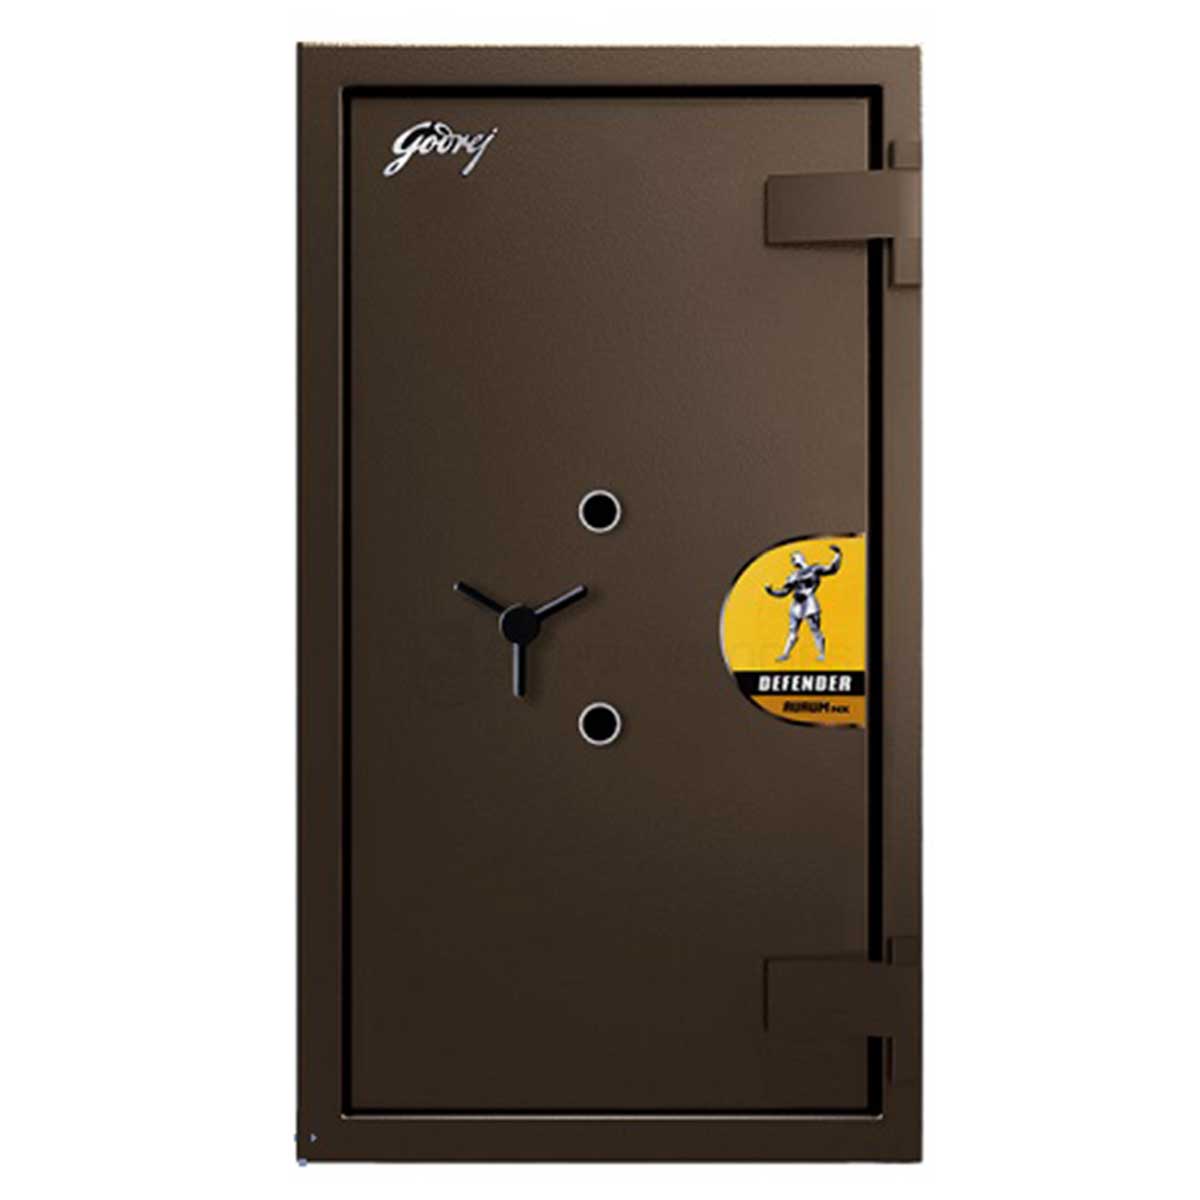 Godrej safety locker Manufacturers, Suppliers in East Of Kailash